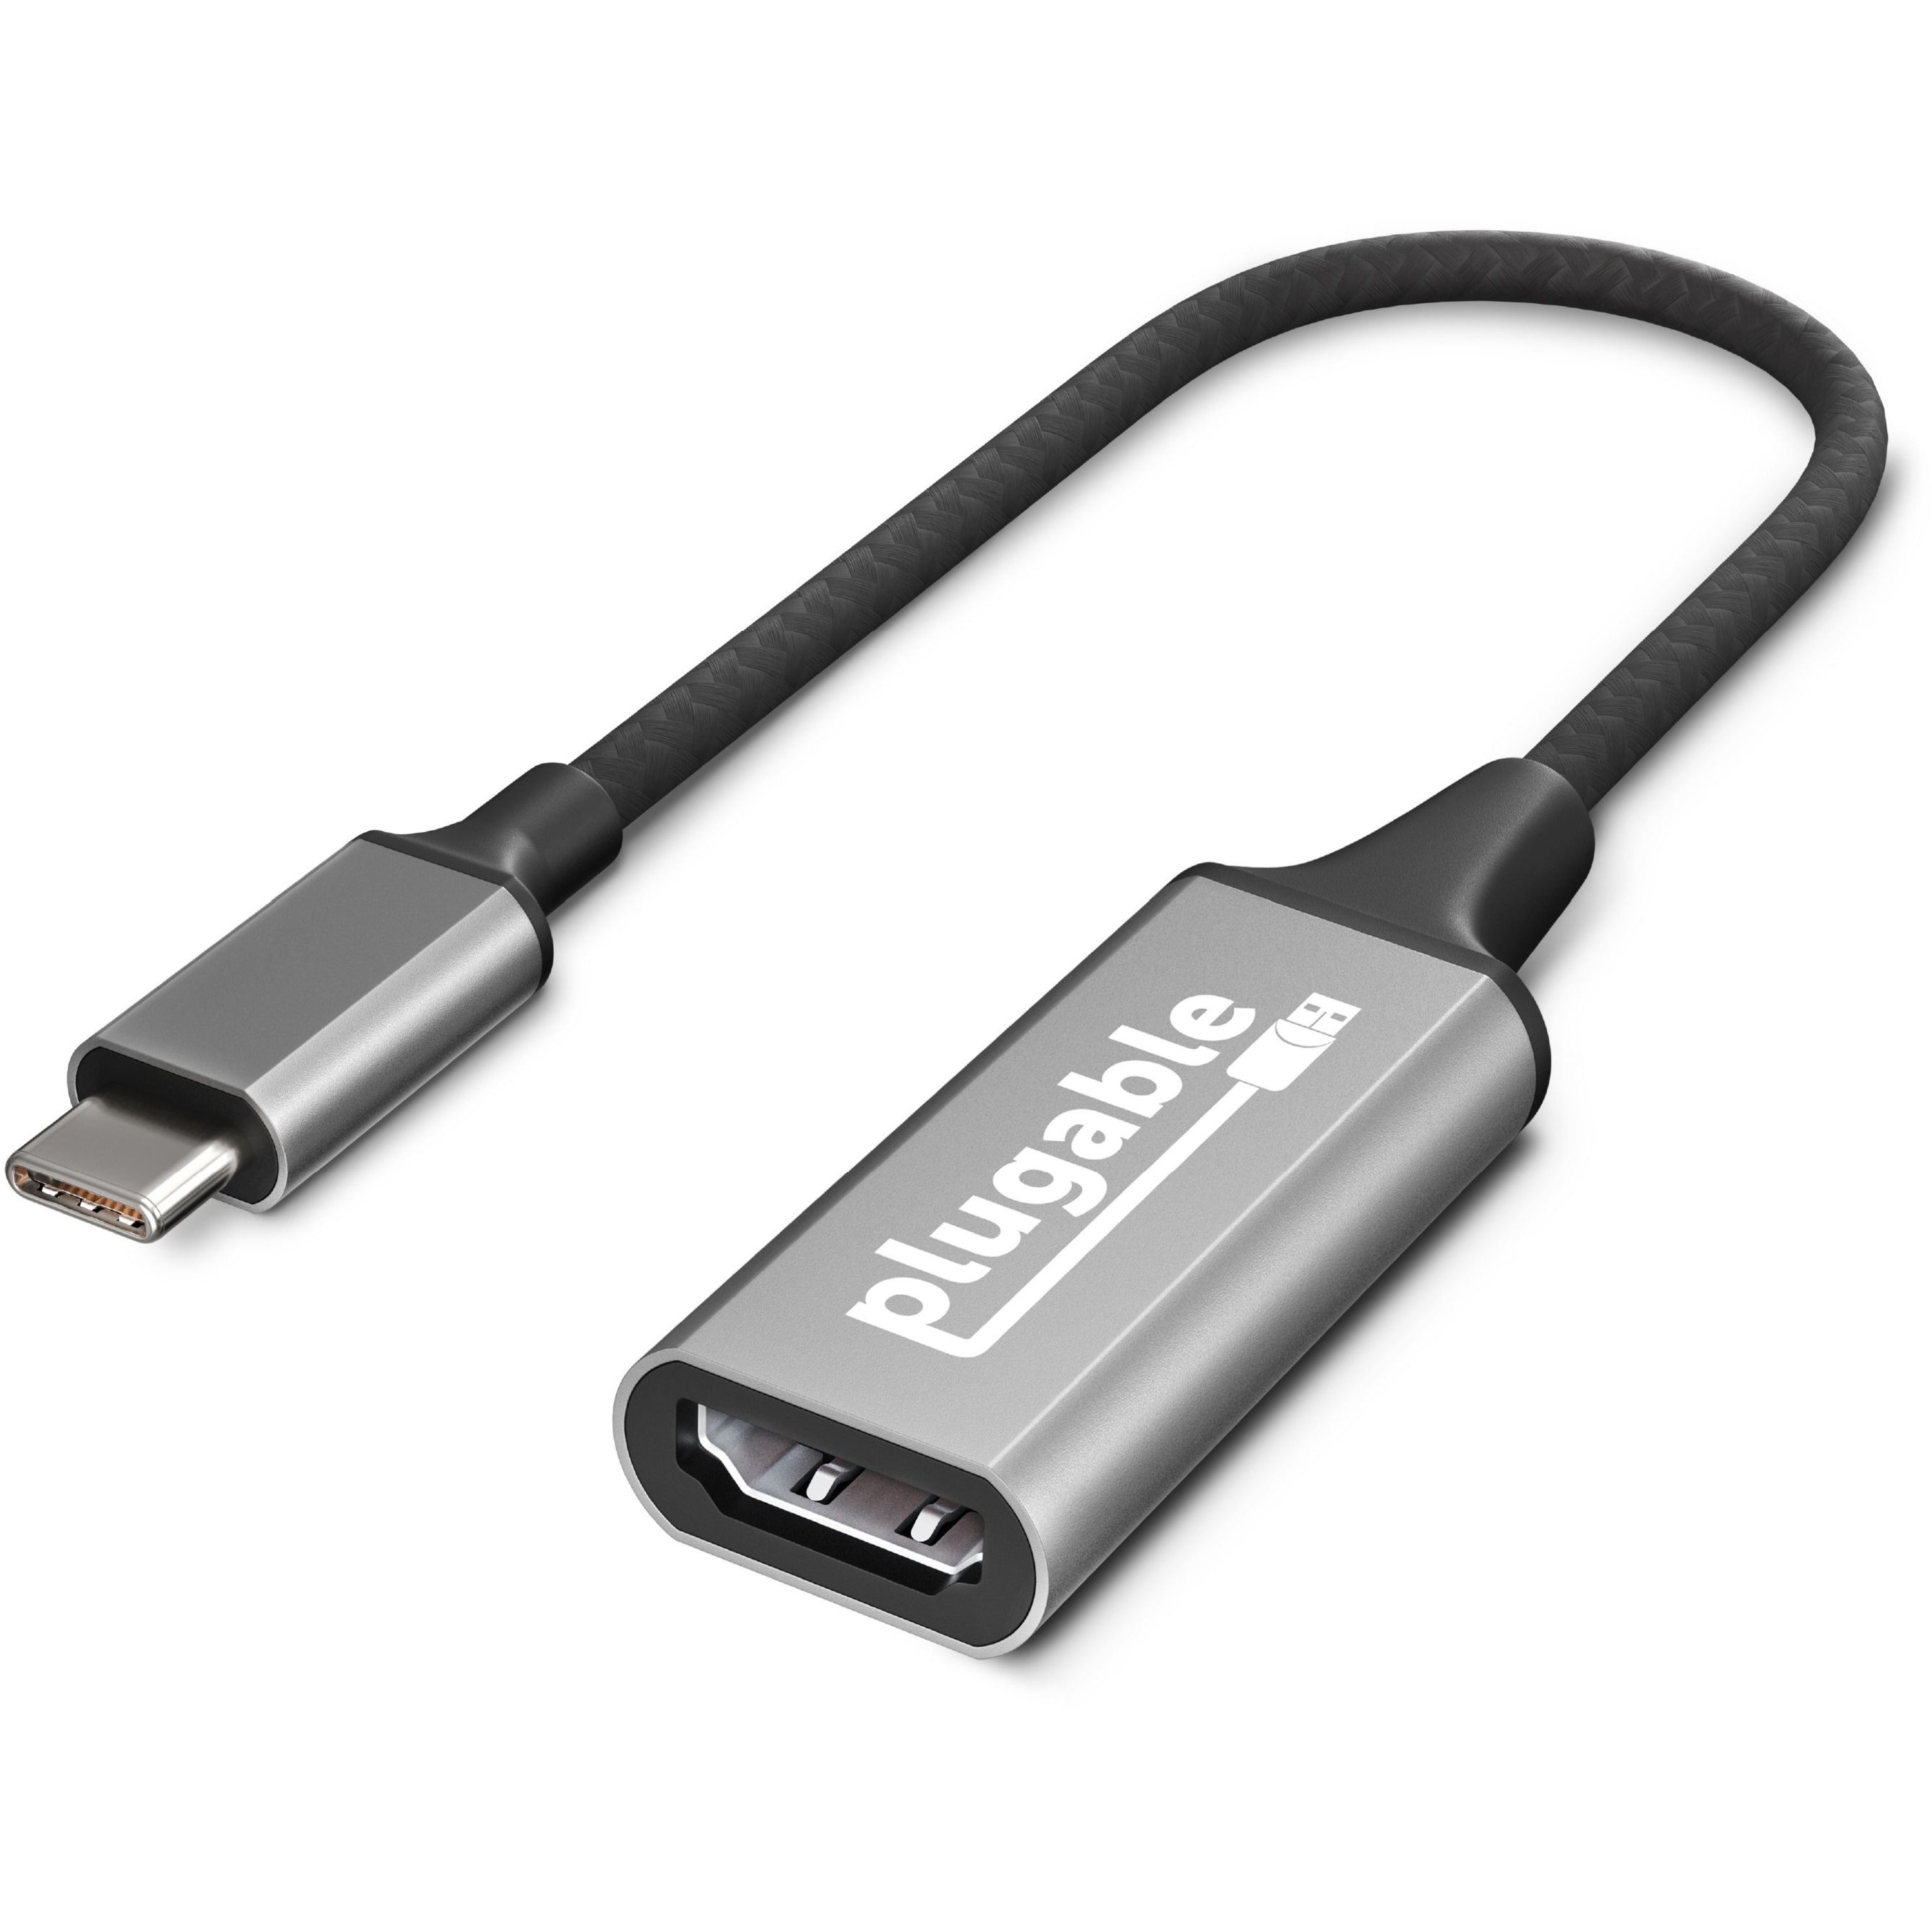 Plugable USBC-HDMI USB 3.1 Type-C to HDMI 2.0 Adapter Plug and Play 3840 x 2160 Maximum Resolution Supported